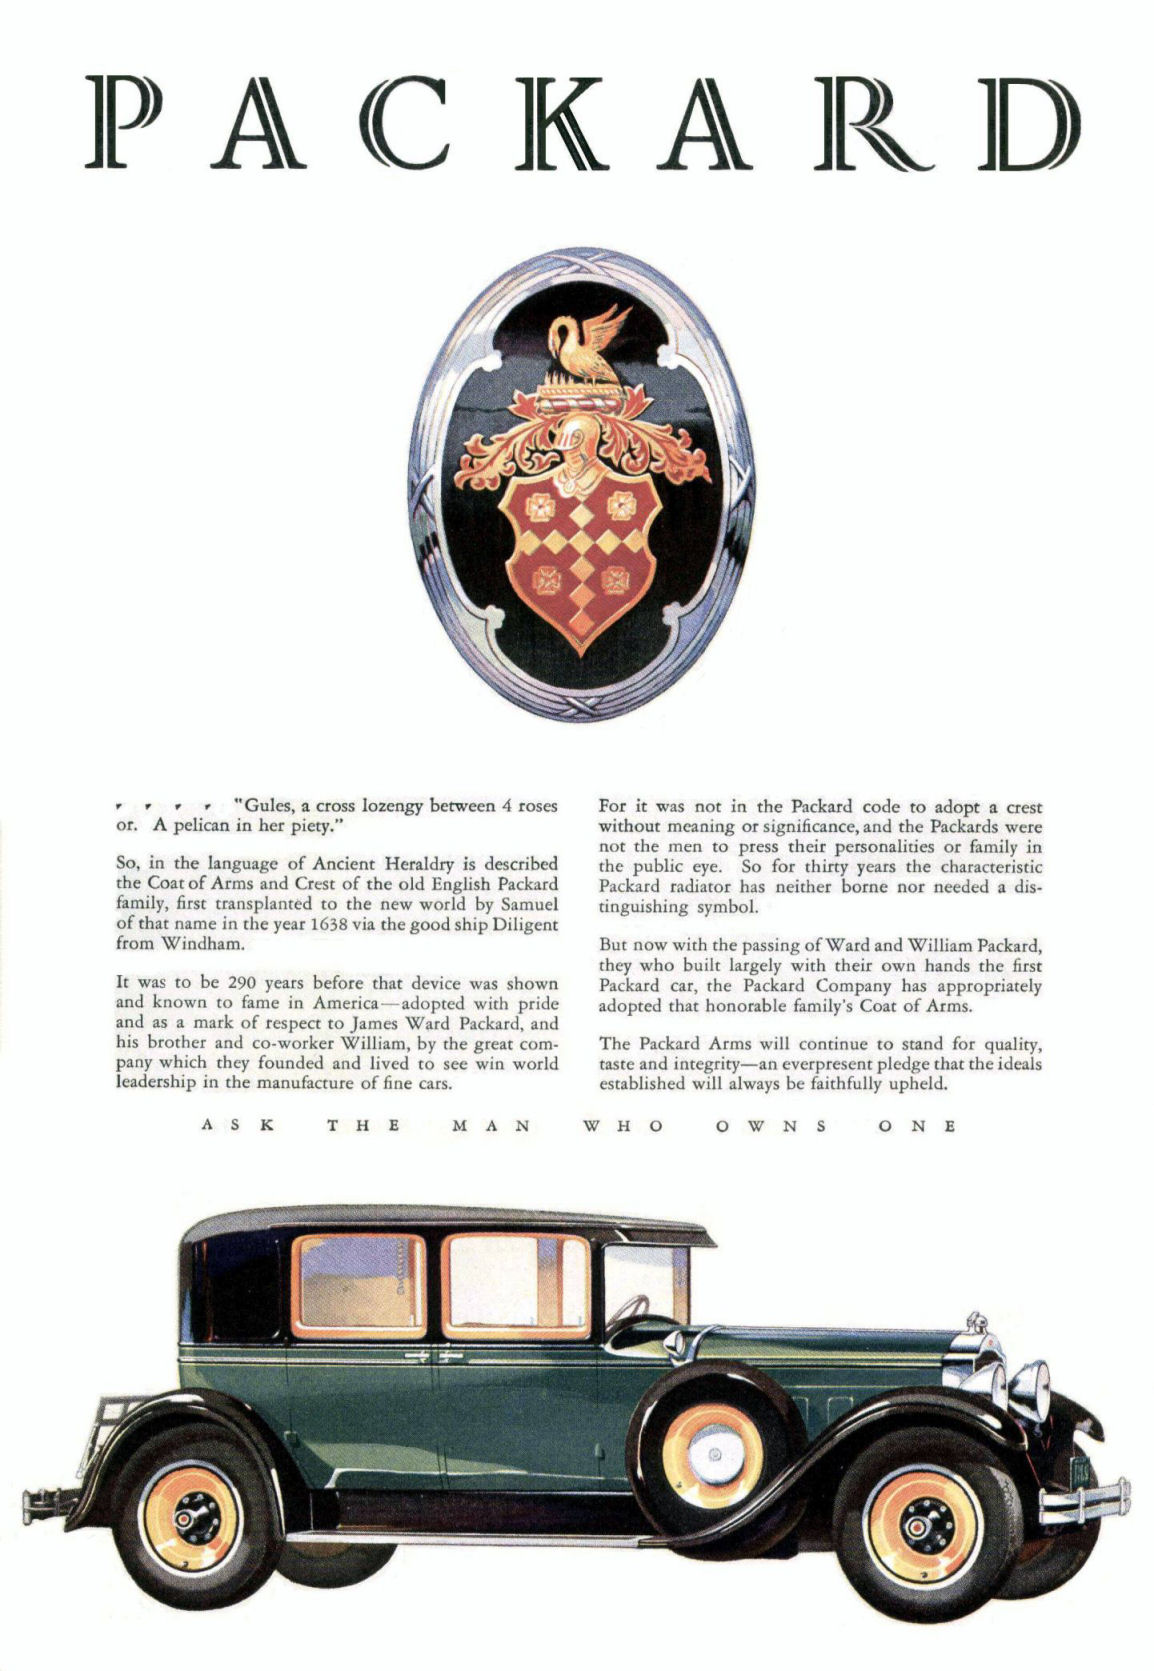 1928 Packard Auto Advertising